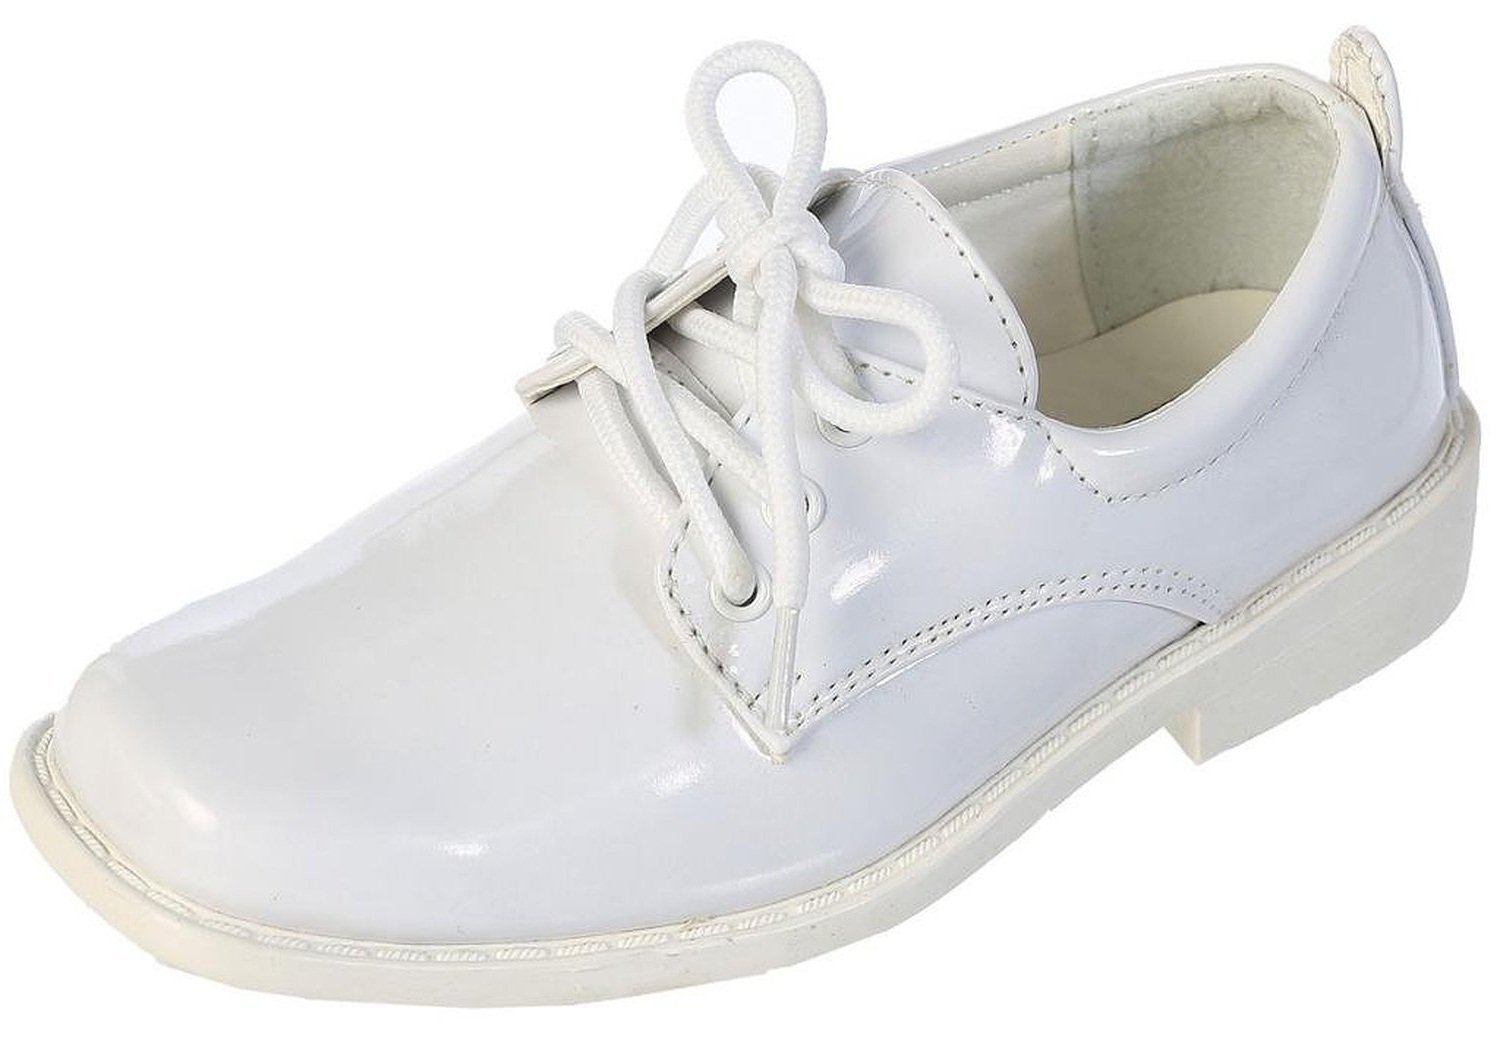 Boys Square Toe Lace Up Oxford Patent Dress Shoes - Available in White 3 Little Kid